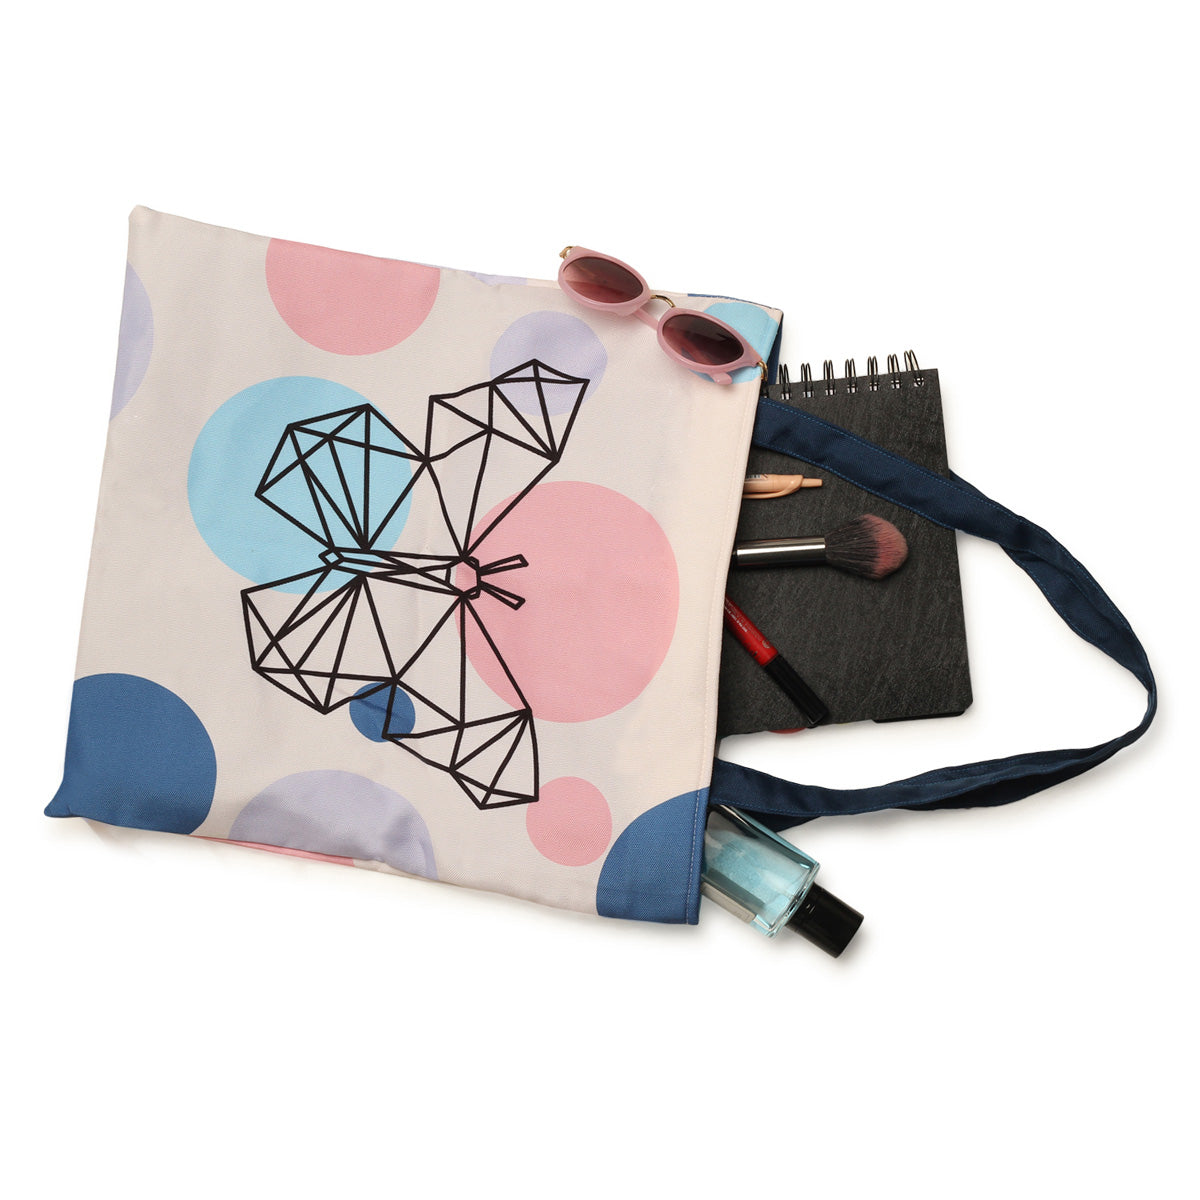 A stylish tote bag with a pink, blue, and white geometric pattern, perfect for adding a pop of color to any outfit.